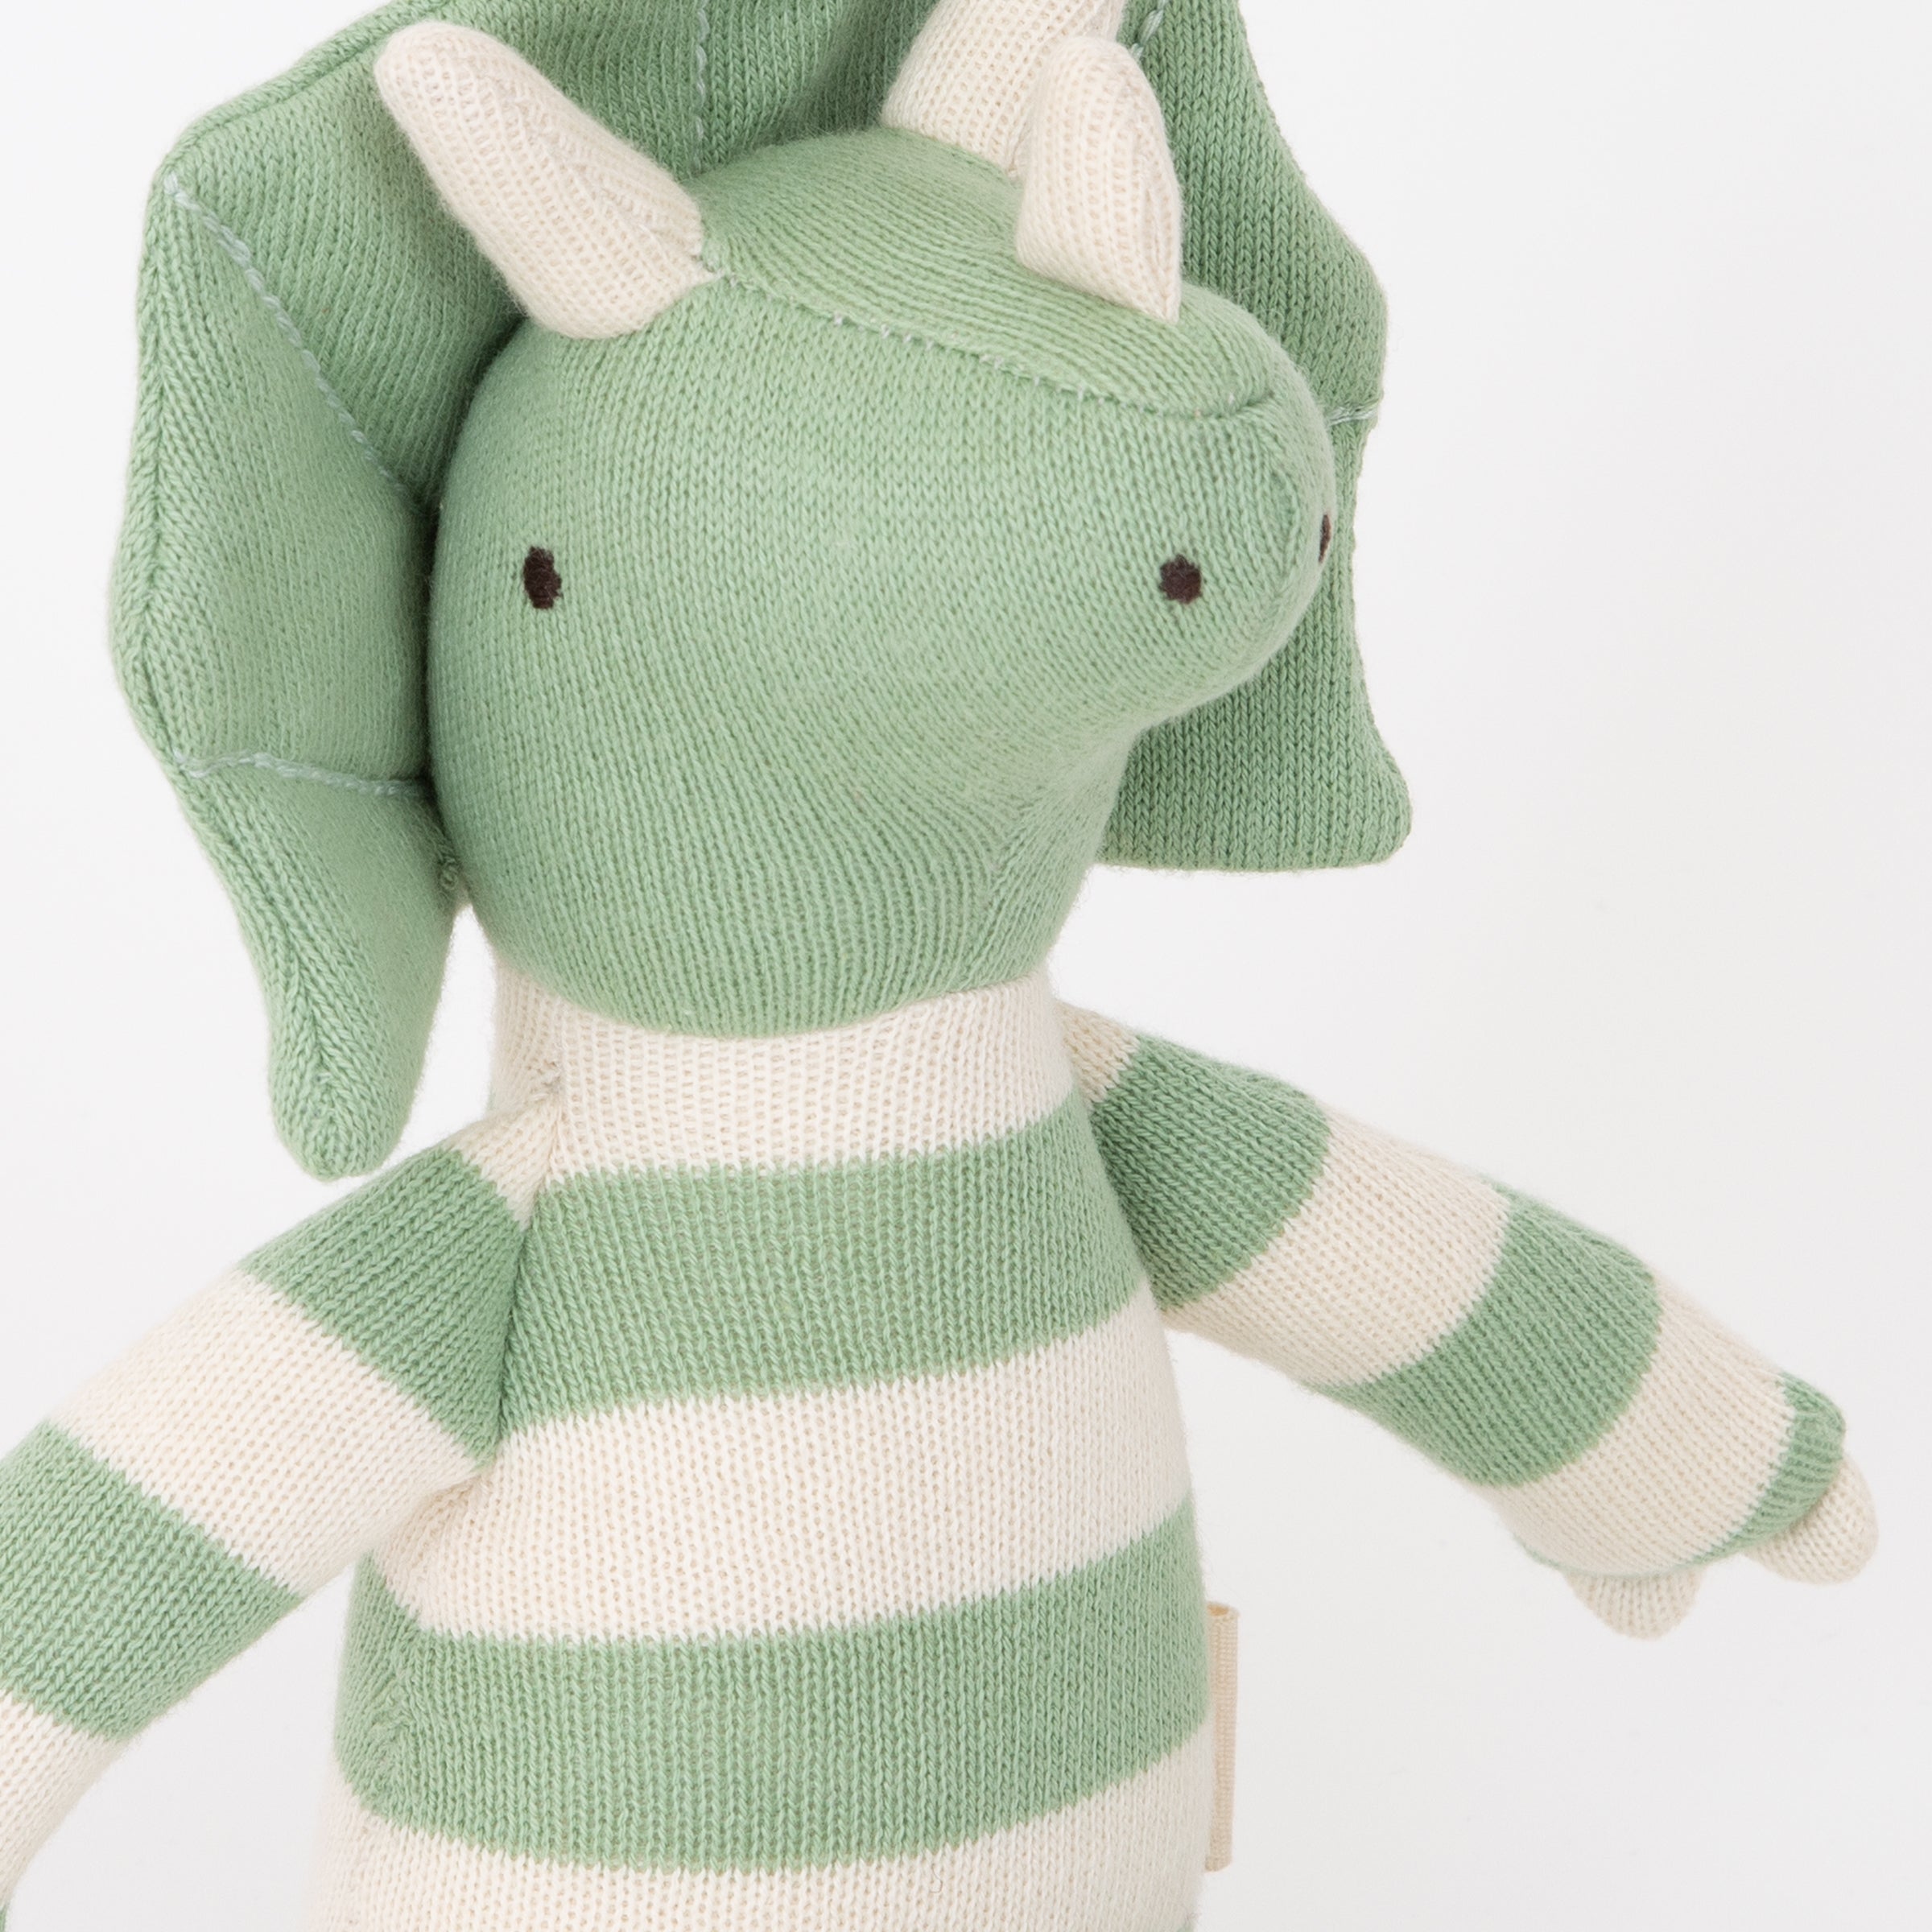 This Triceratops kids soft toy is an organic cotton toy with striped details.